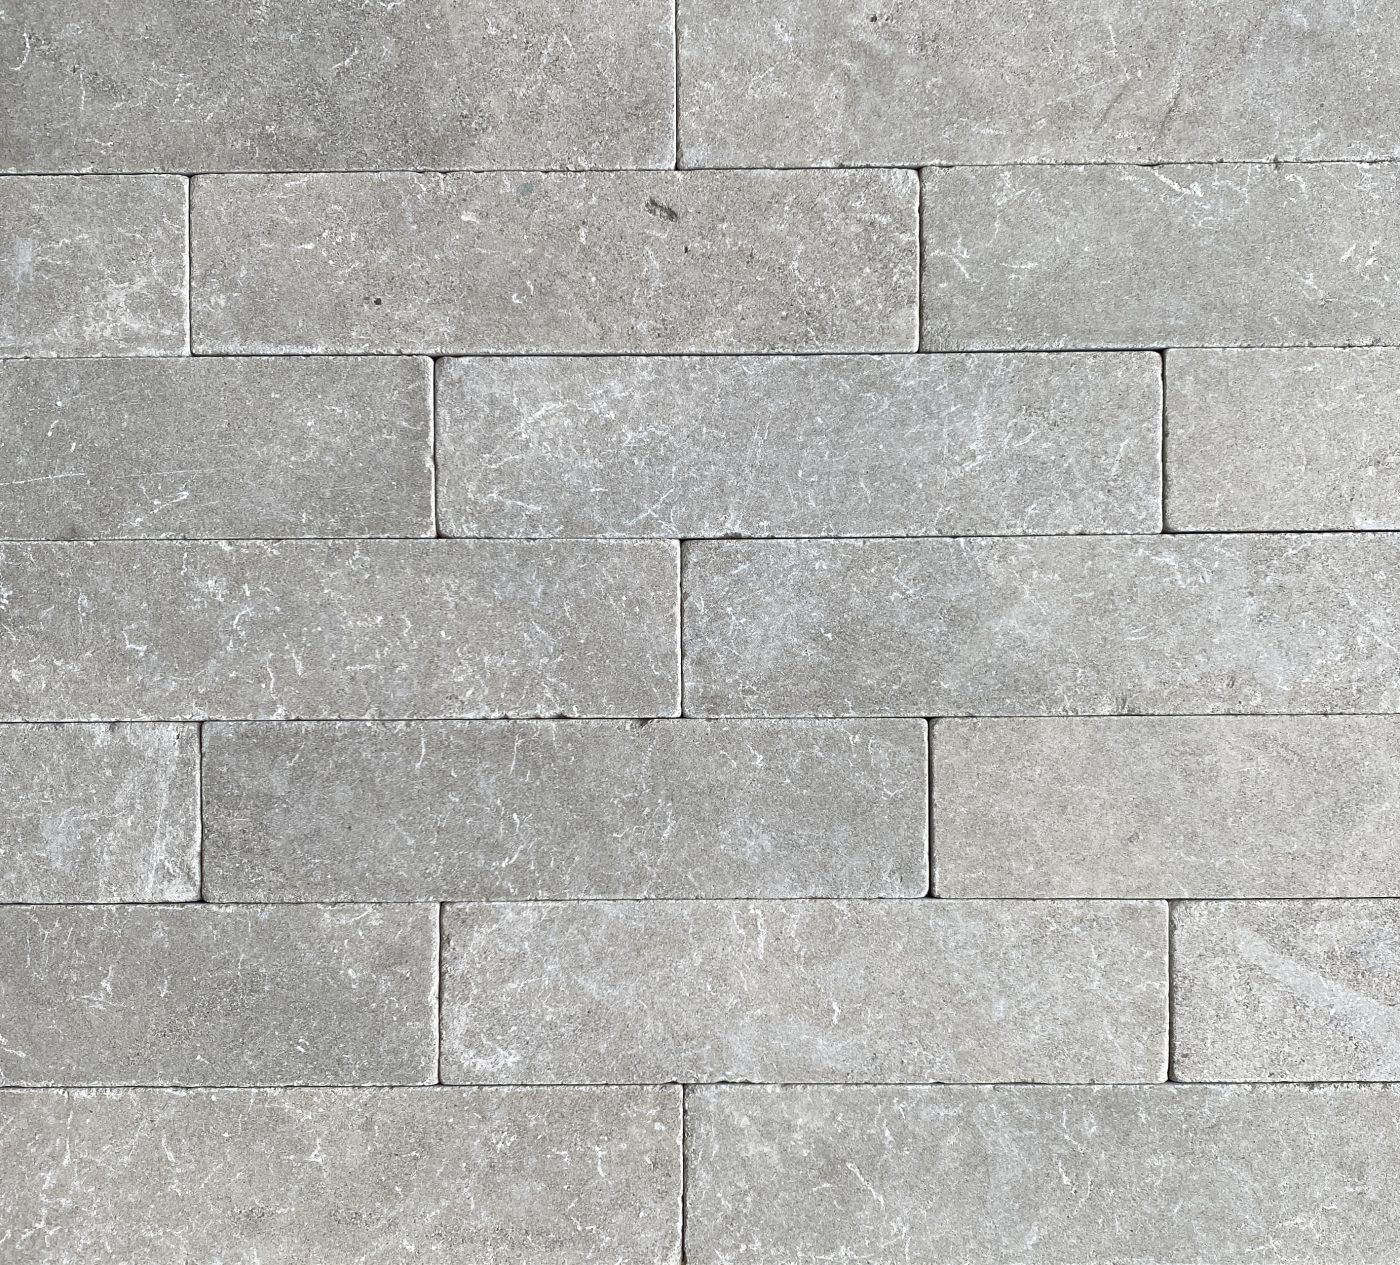 MADDISON-BRUSHED-TUMBLED-LIMESTONE-BATTONS_RMS-TRADERS_NATURAL-STONE-PAVER-SUPPLIER-MELBOURNE-15-1-scaled